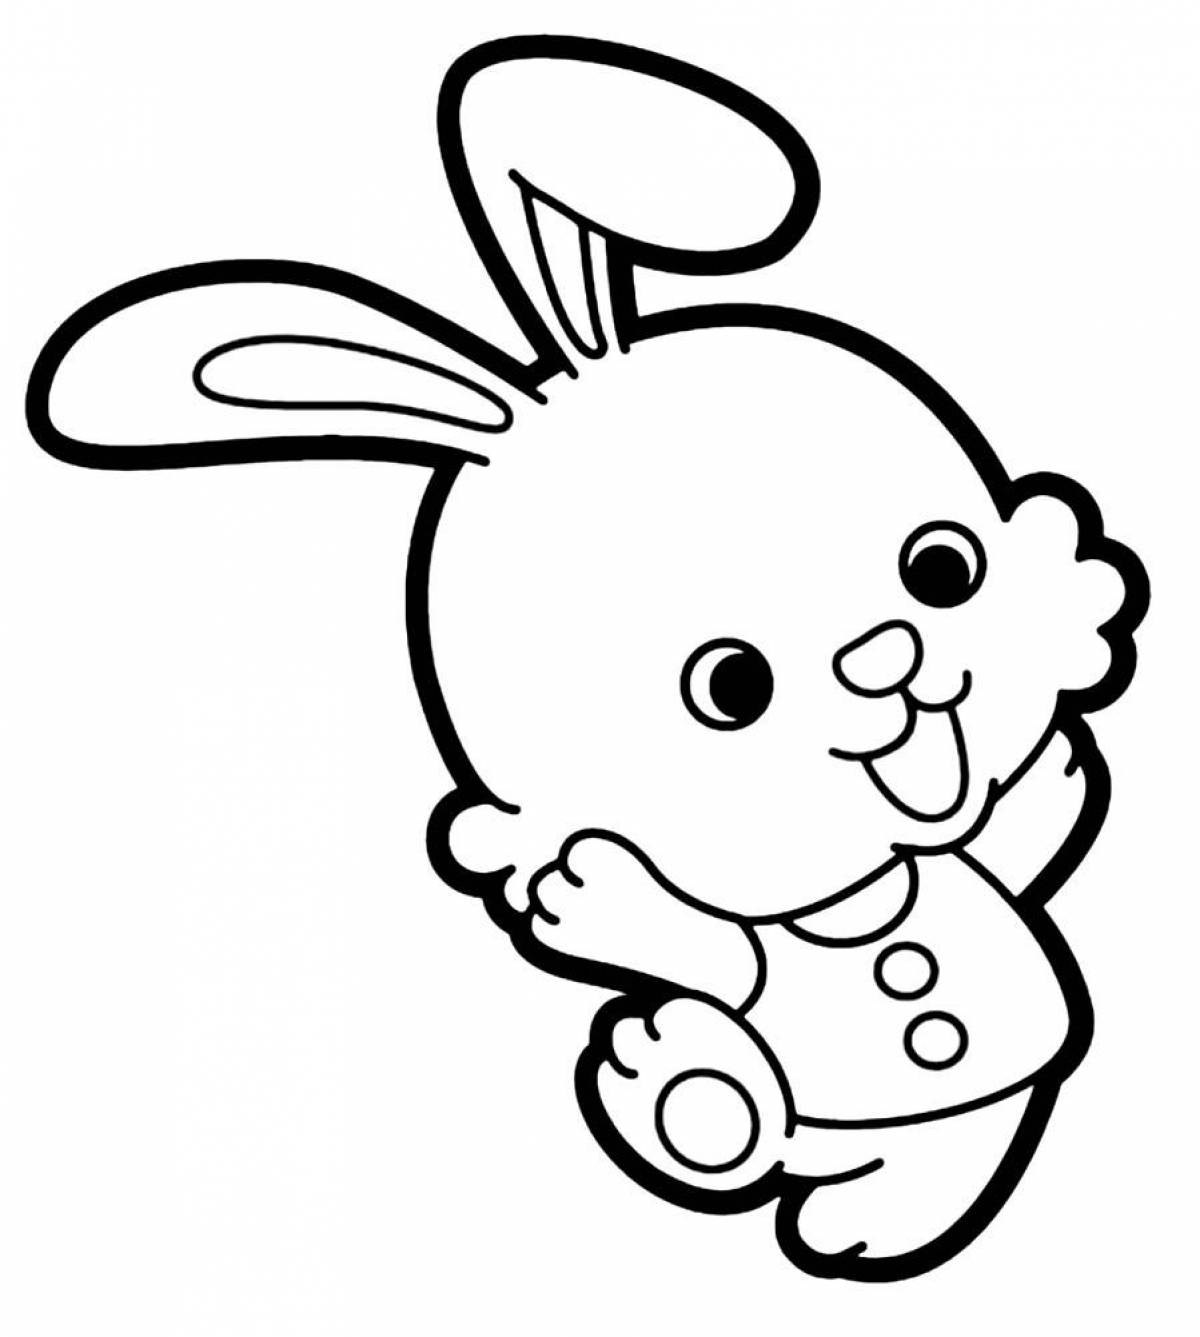 Funny coloring hare picture for kids